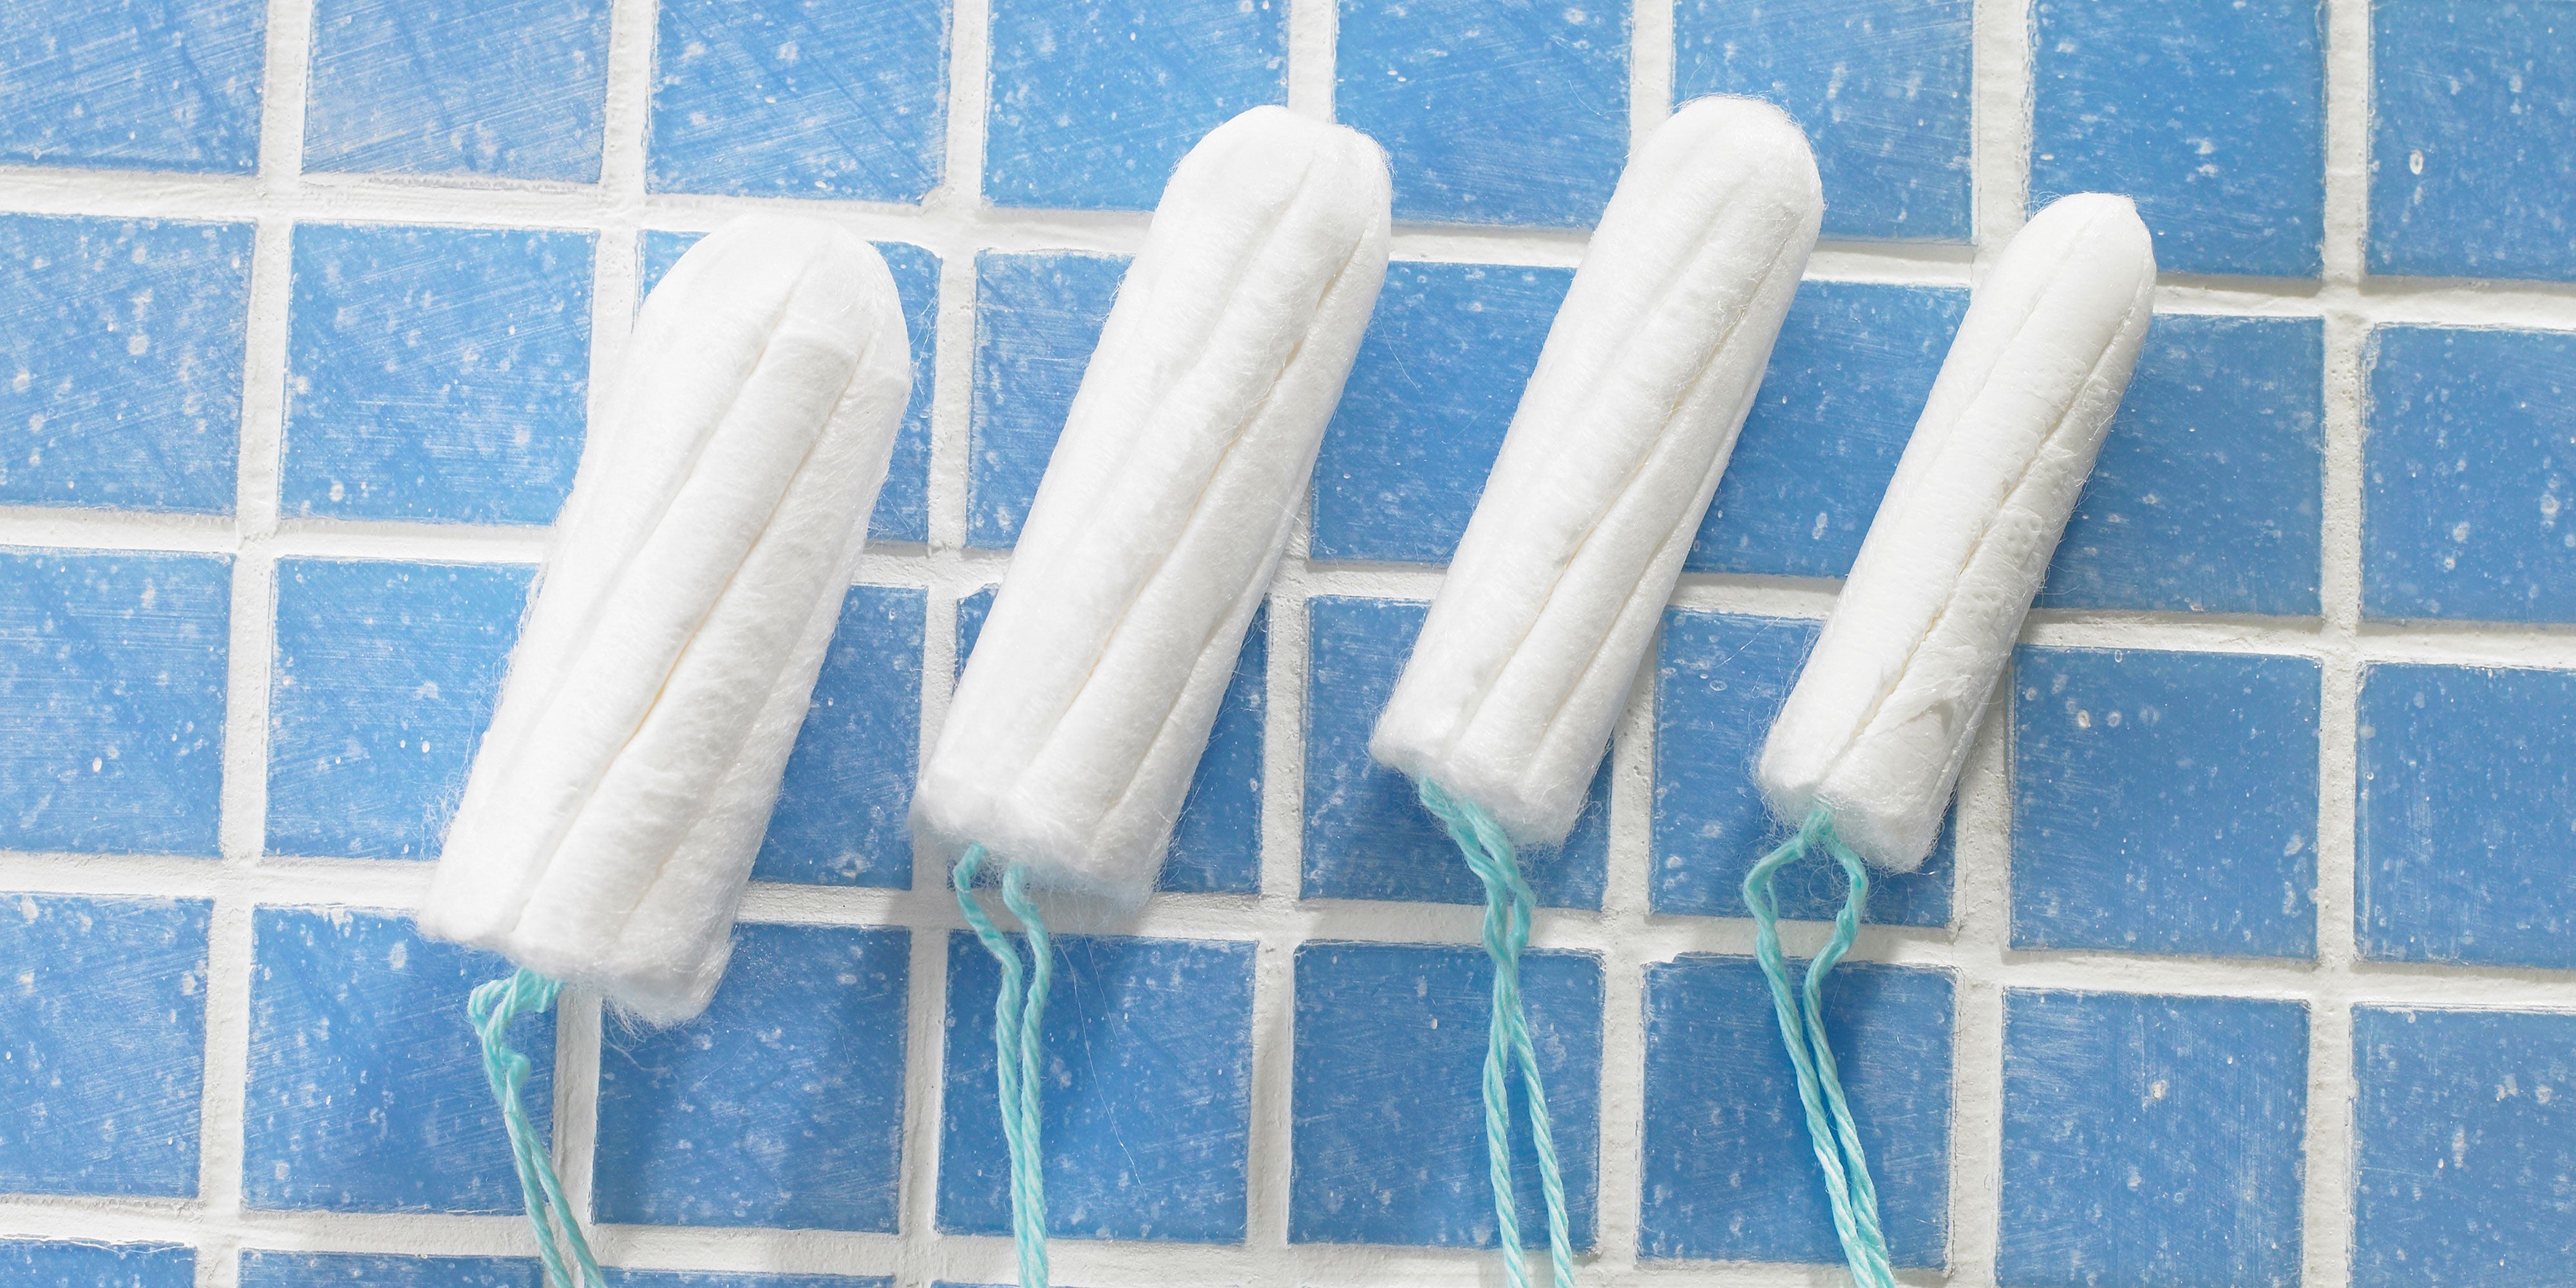 Tampon Sex Acts - Tampons: cause for concern?